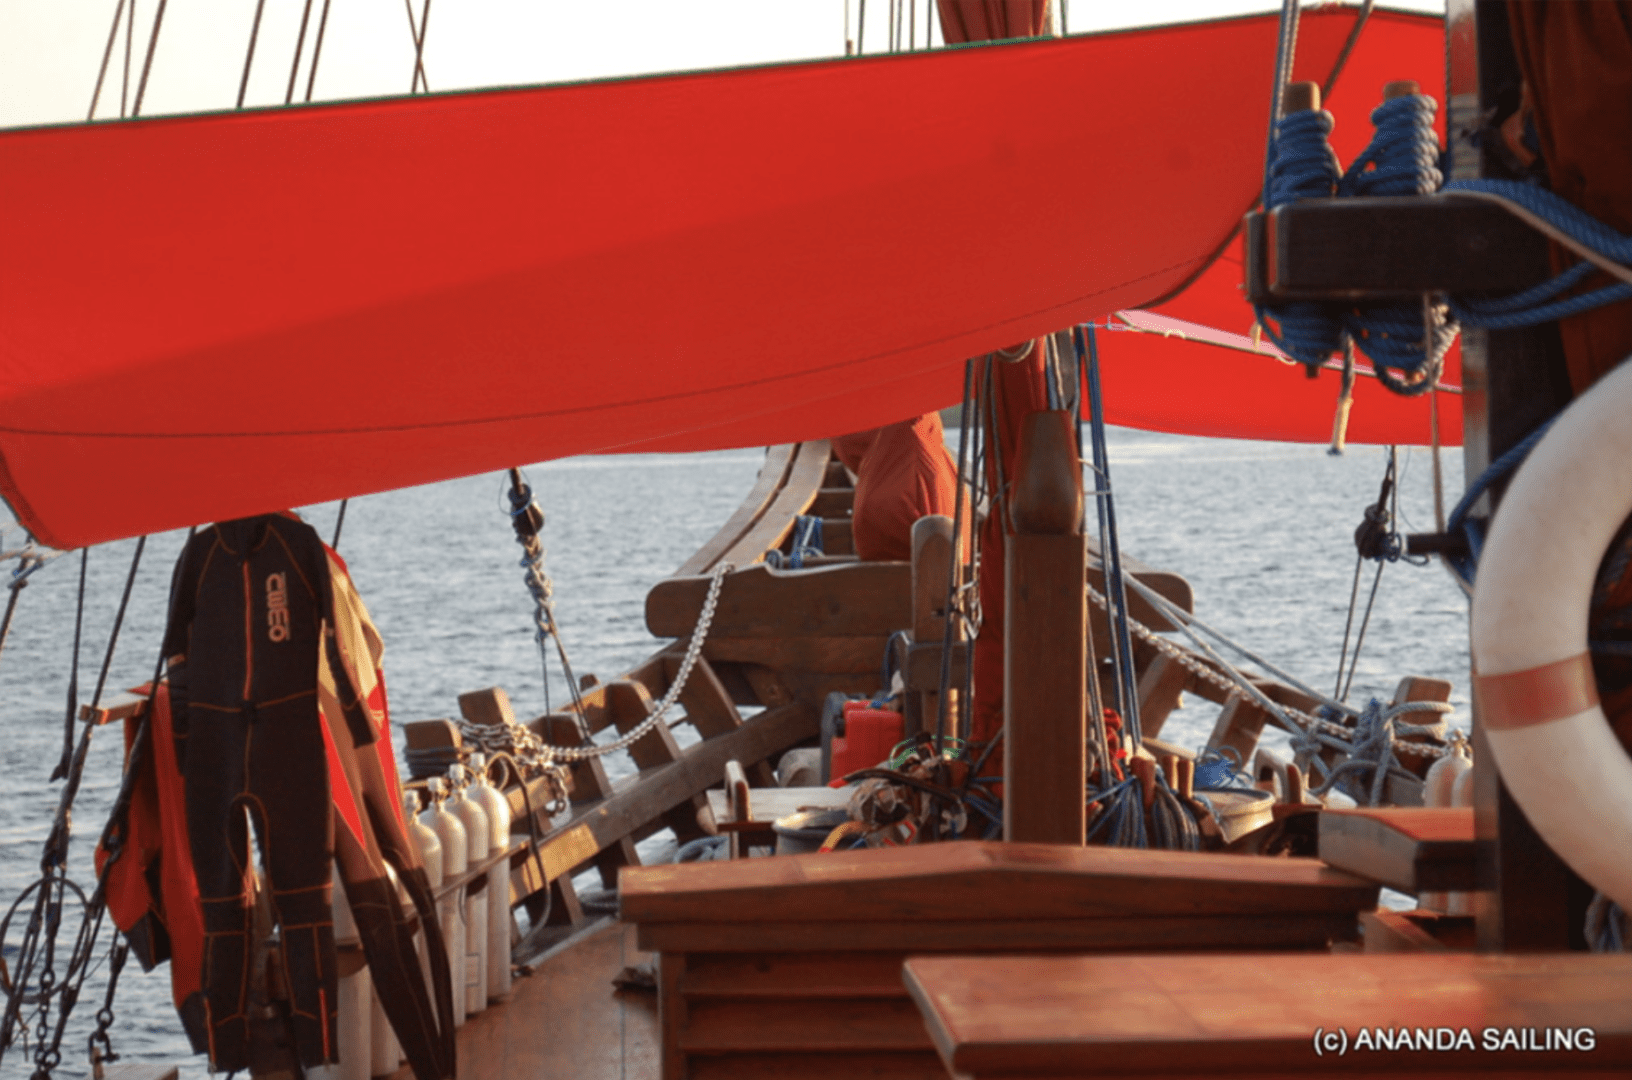 A red sail on a boat with KLM branding is available for sale in Ananda 2019.